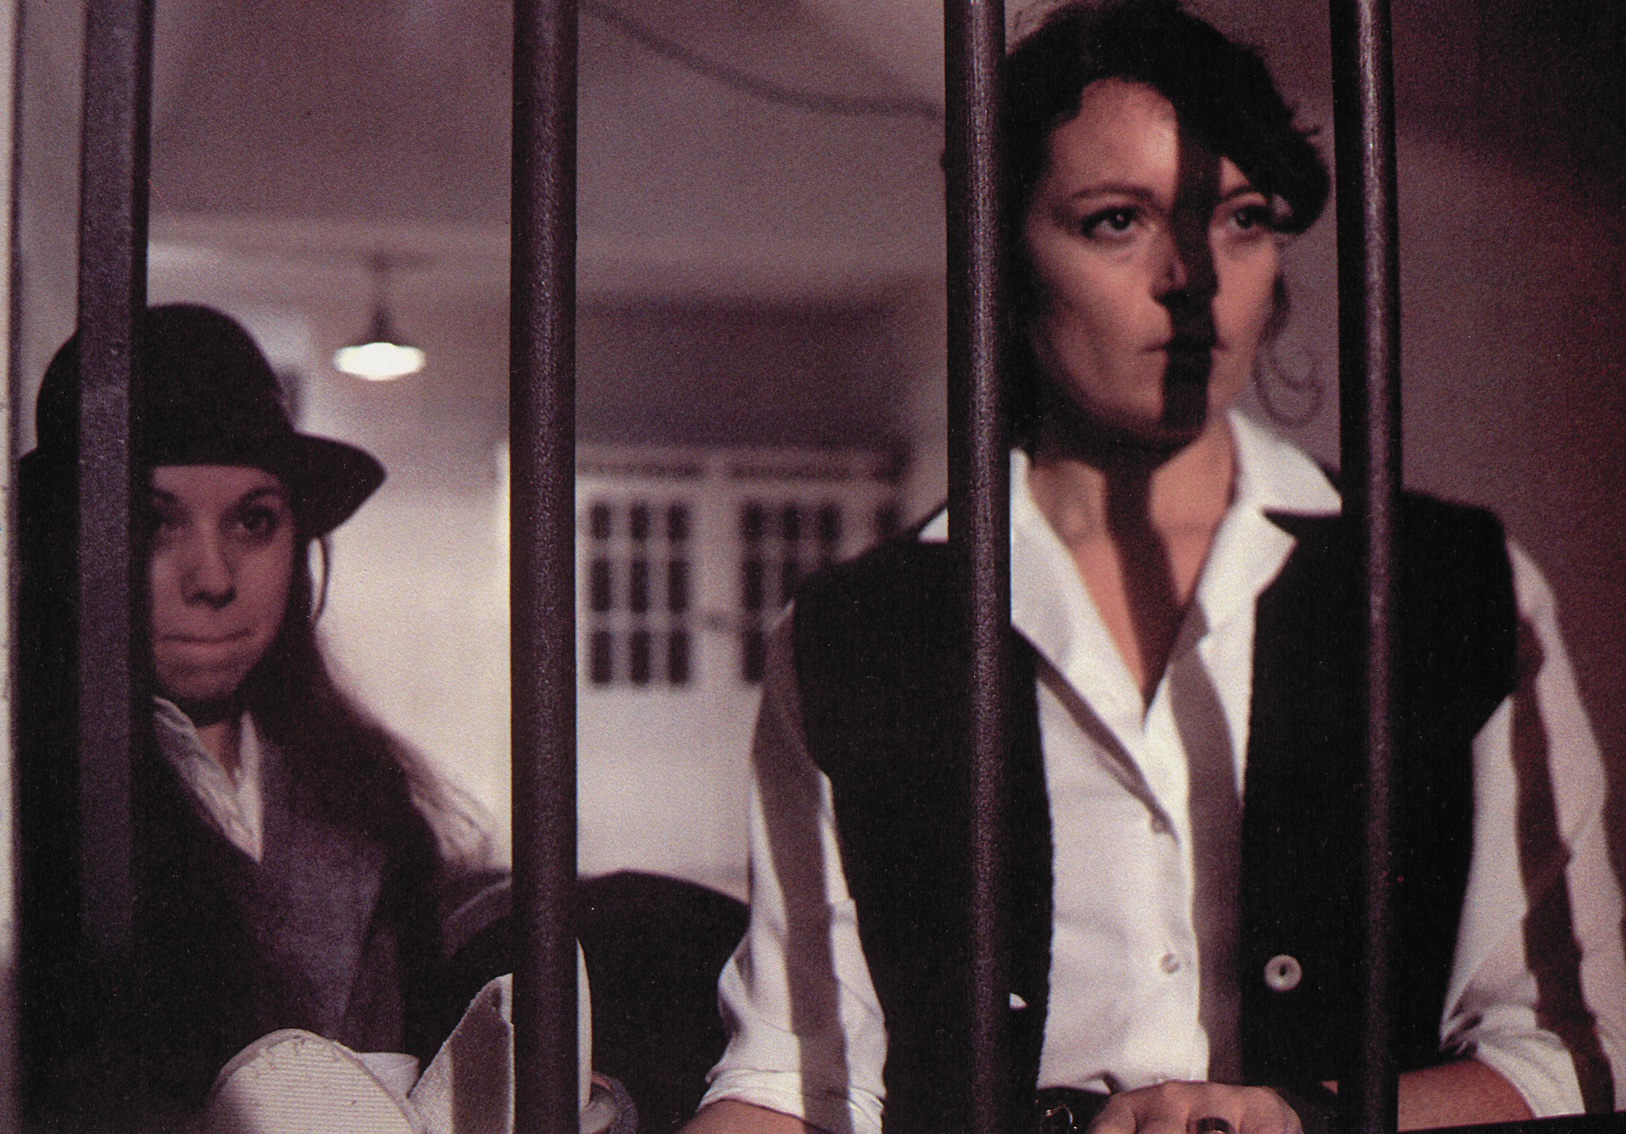 Two women stand behind bars in a prison cell. The one on the right wears a white shirt and black sleeveless jacket. A shadow from one of the cell bars is cast upon her face.